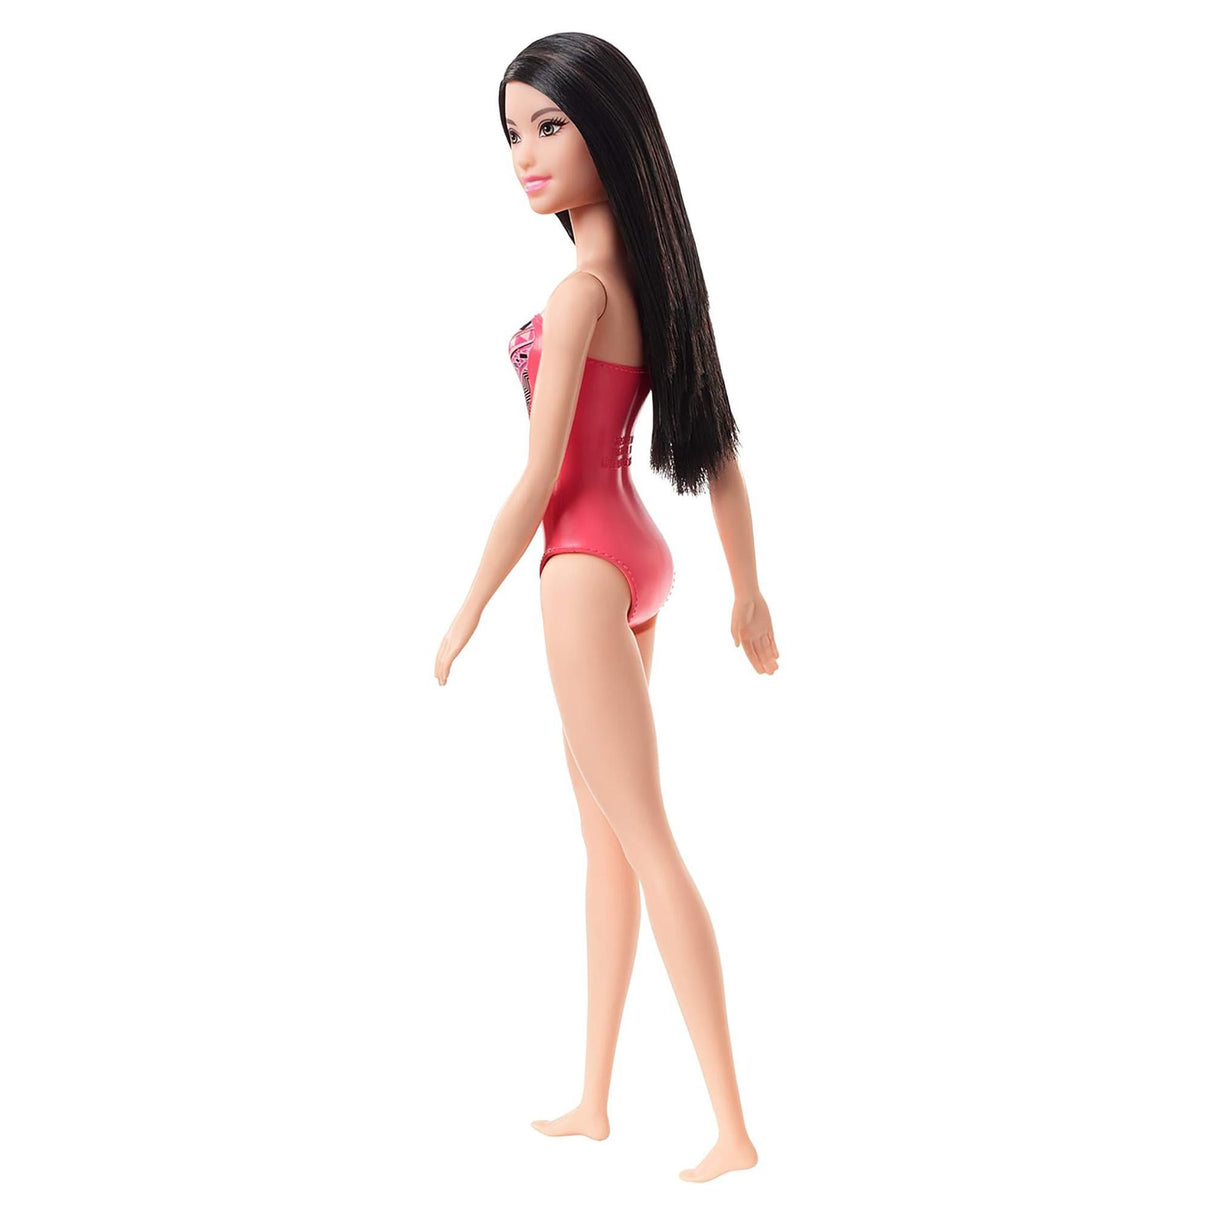 Barbie Swimsuit Doll - Pink Swimsuit